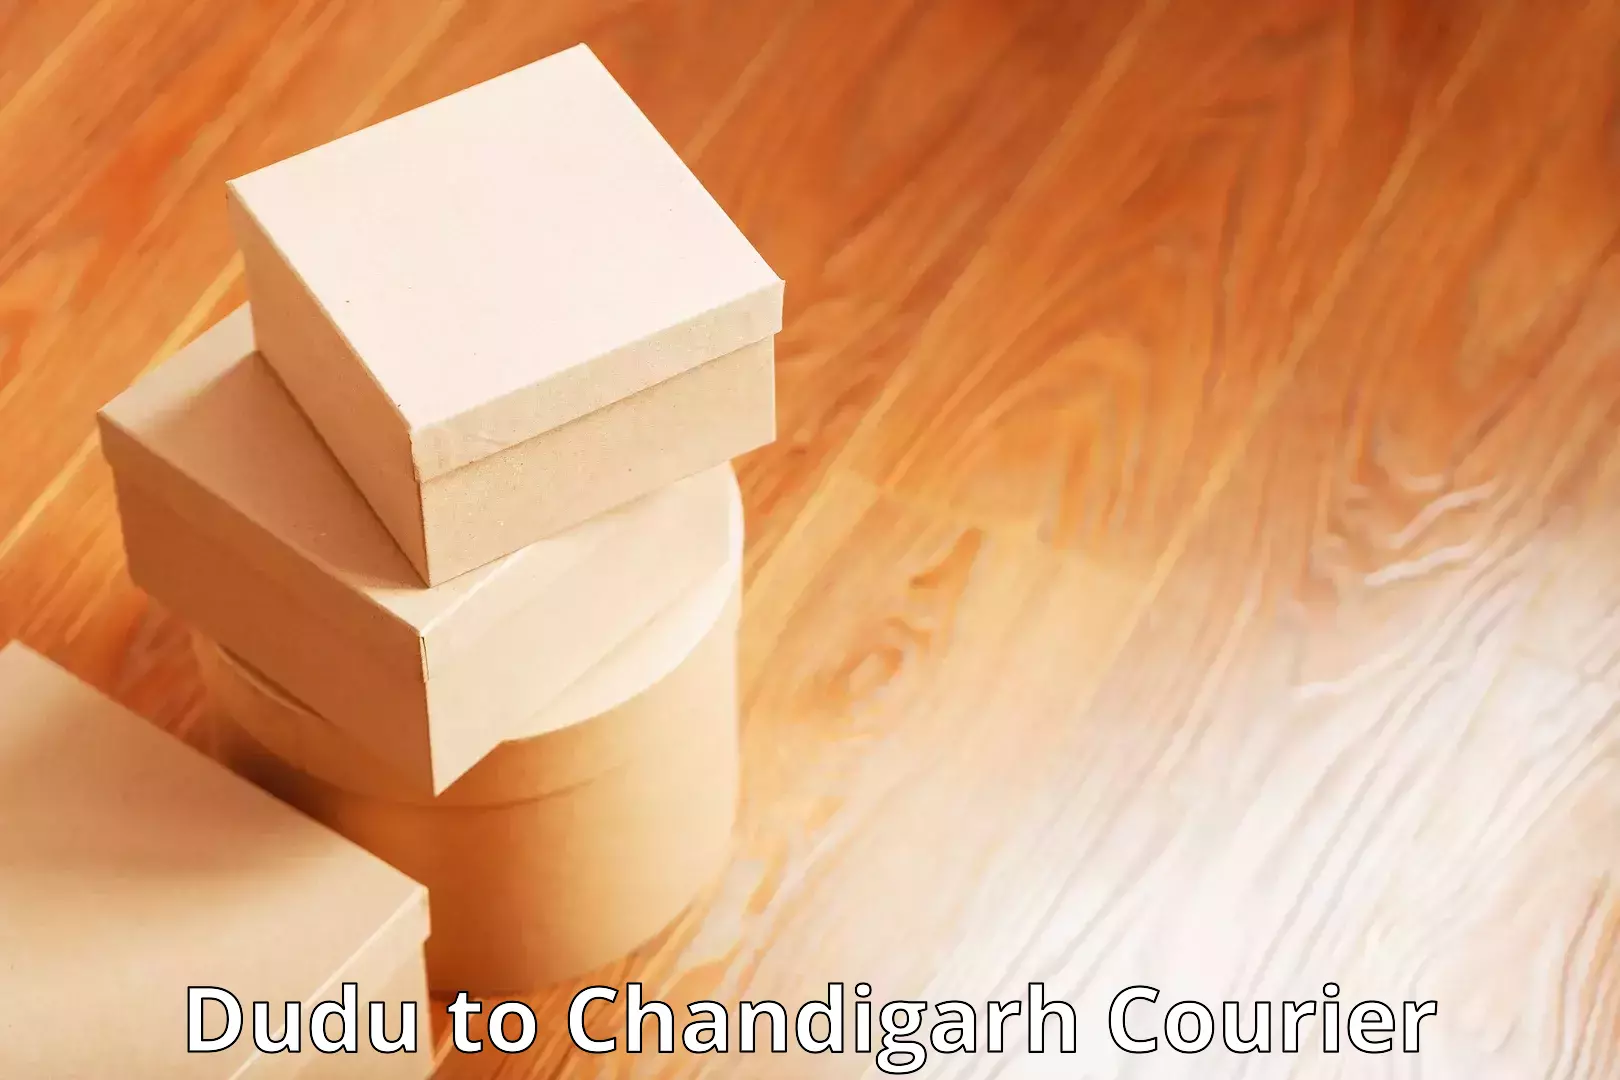 Courier service partnerships Dudu to Chandigarh